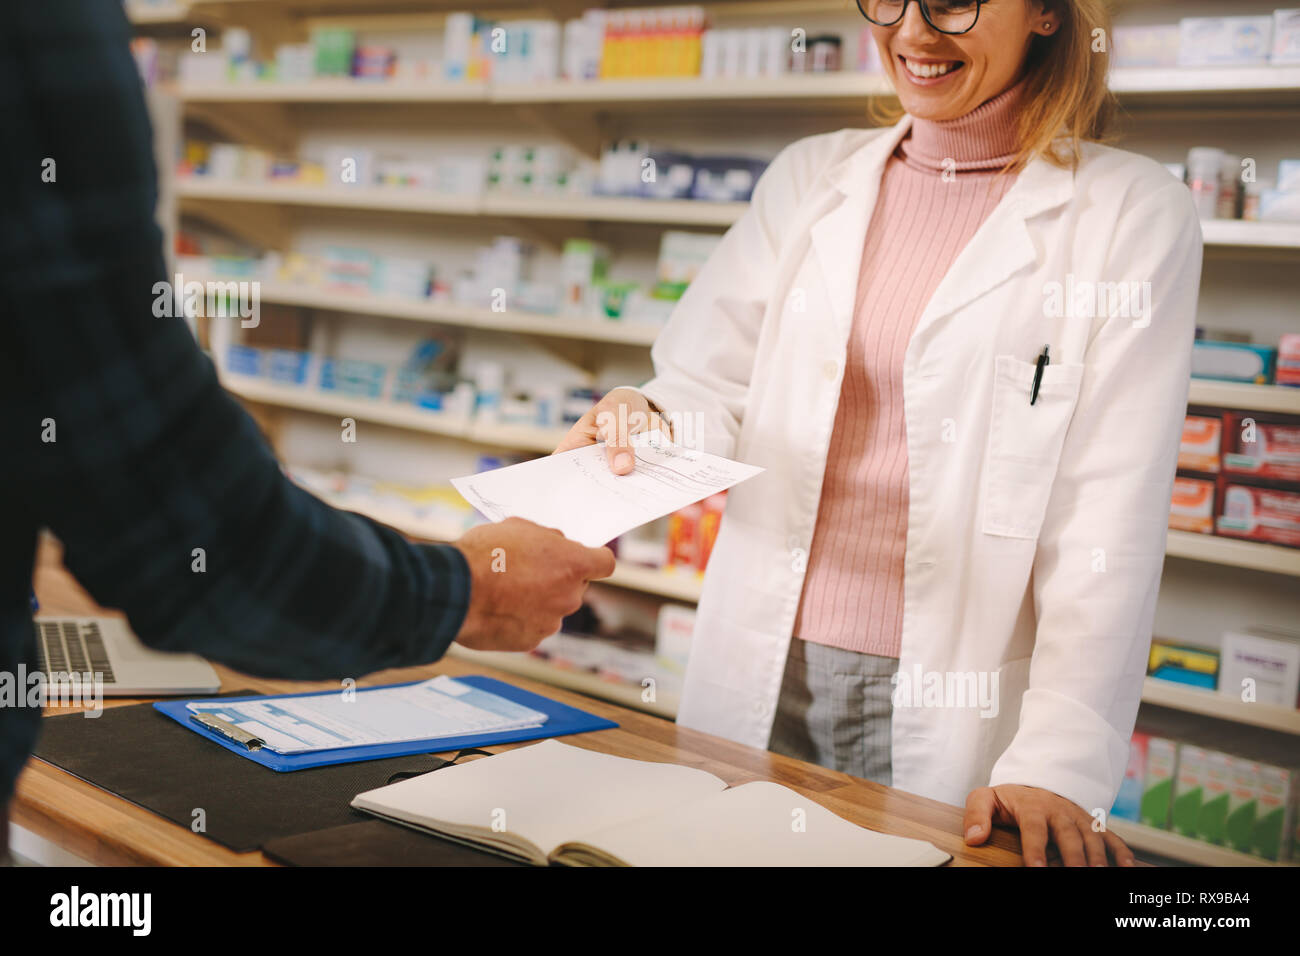 Female apothecary taking prescription from customer at pharmacy. Customer handing a medical prescription to the pharmacist standing behind counter. Stock Photo